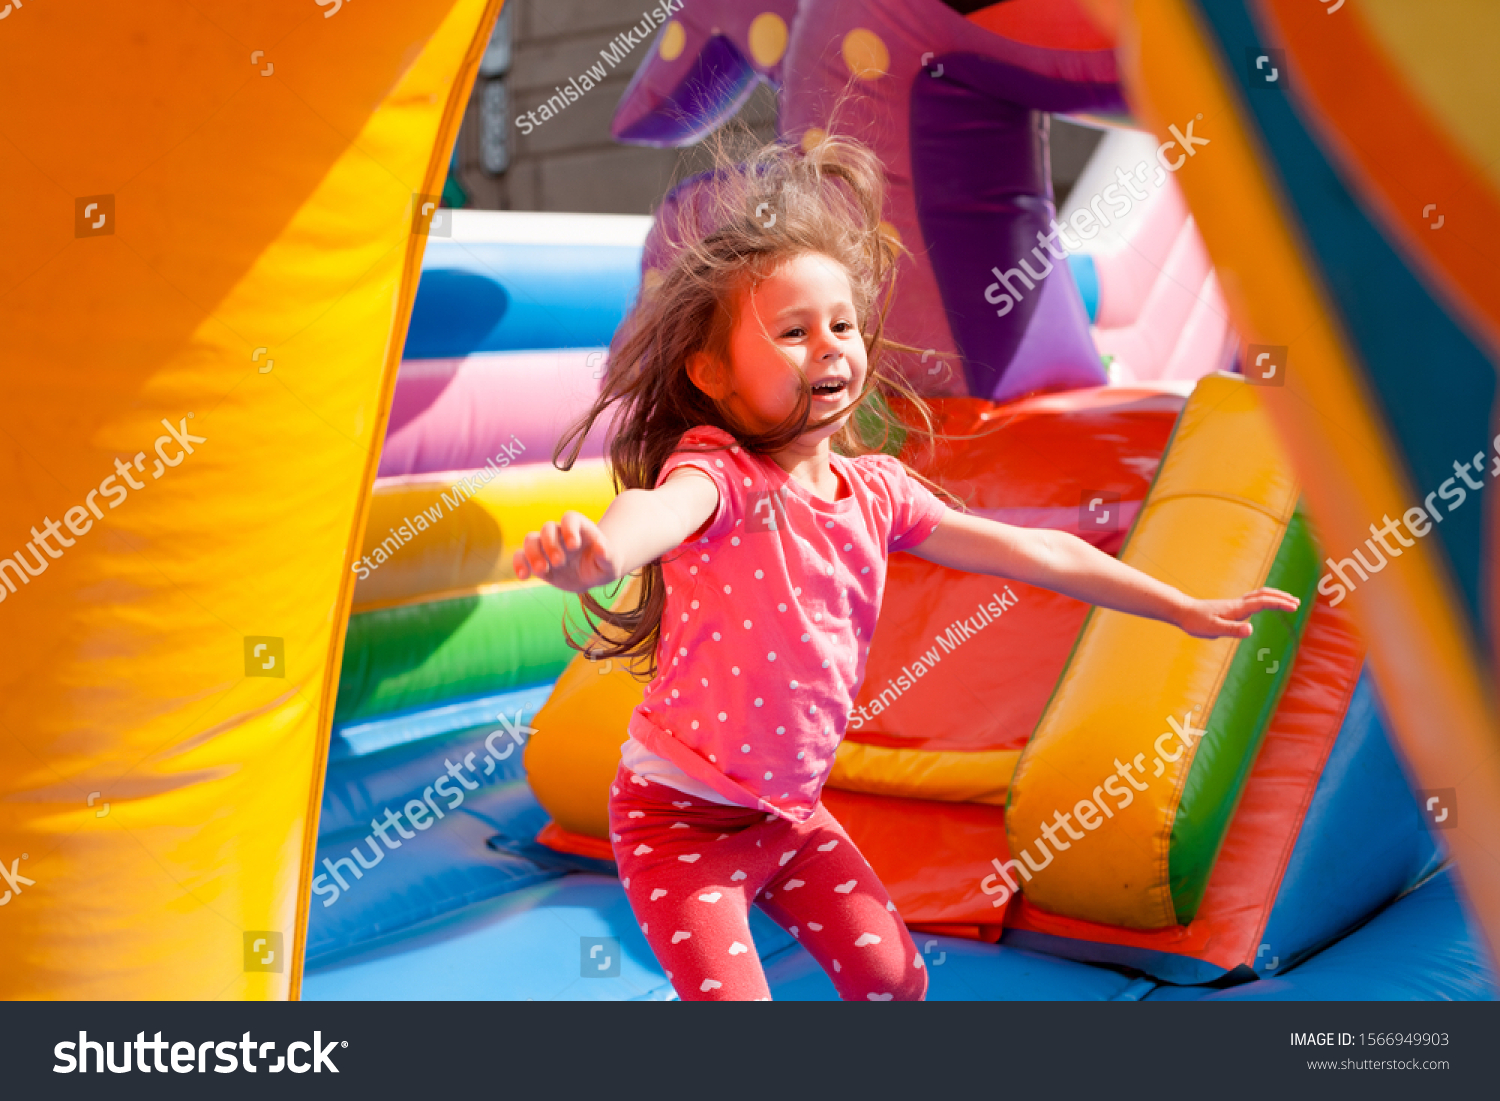 A cheerful child plays in an inflatable castle #1566949903